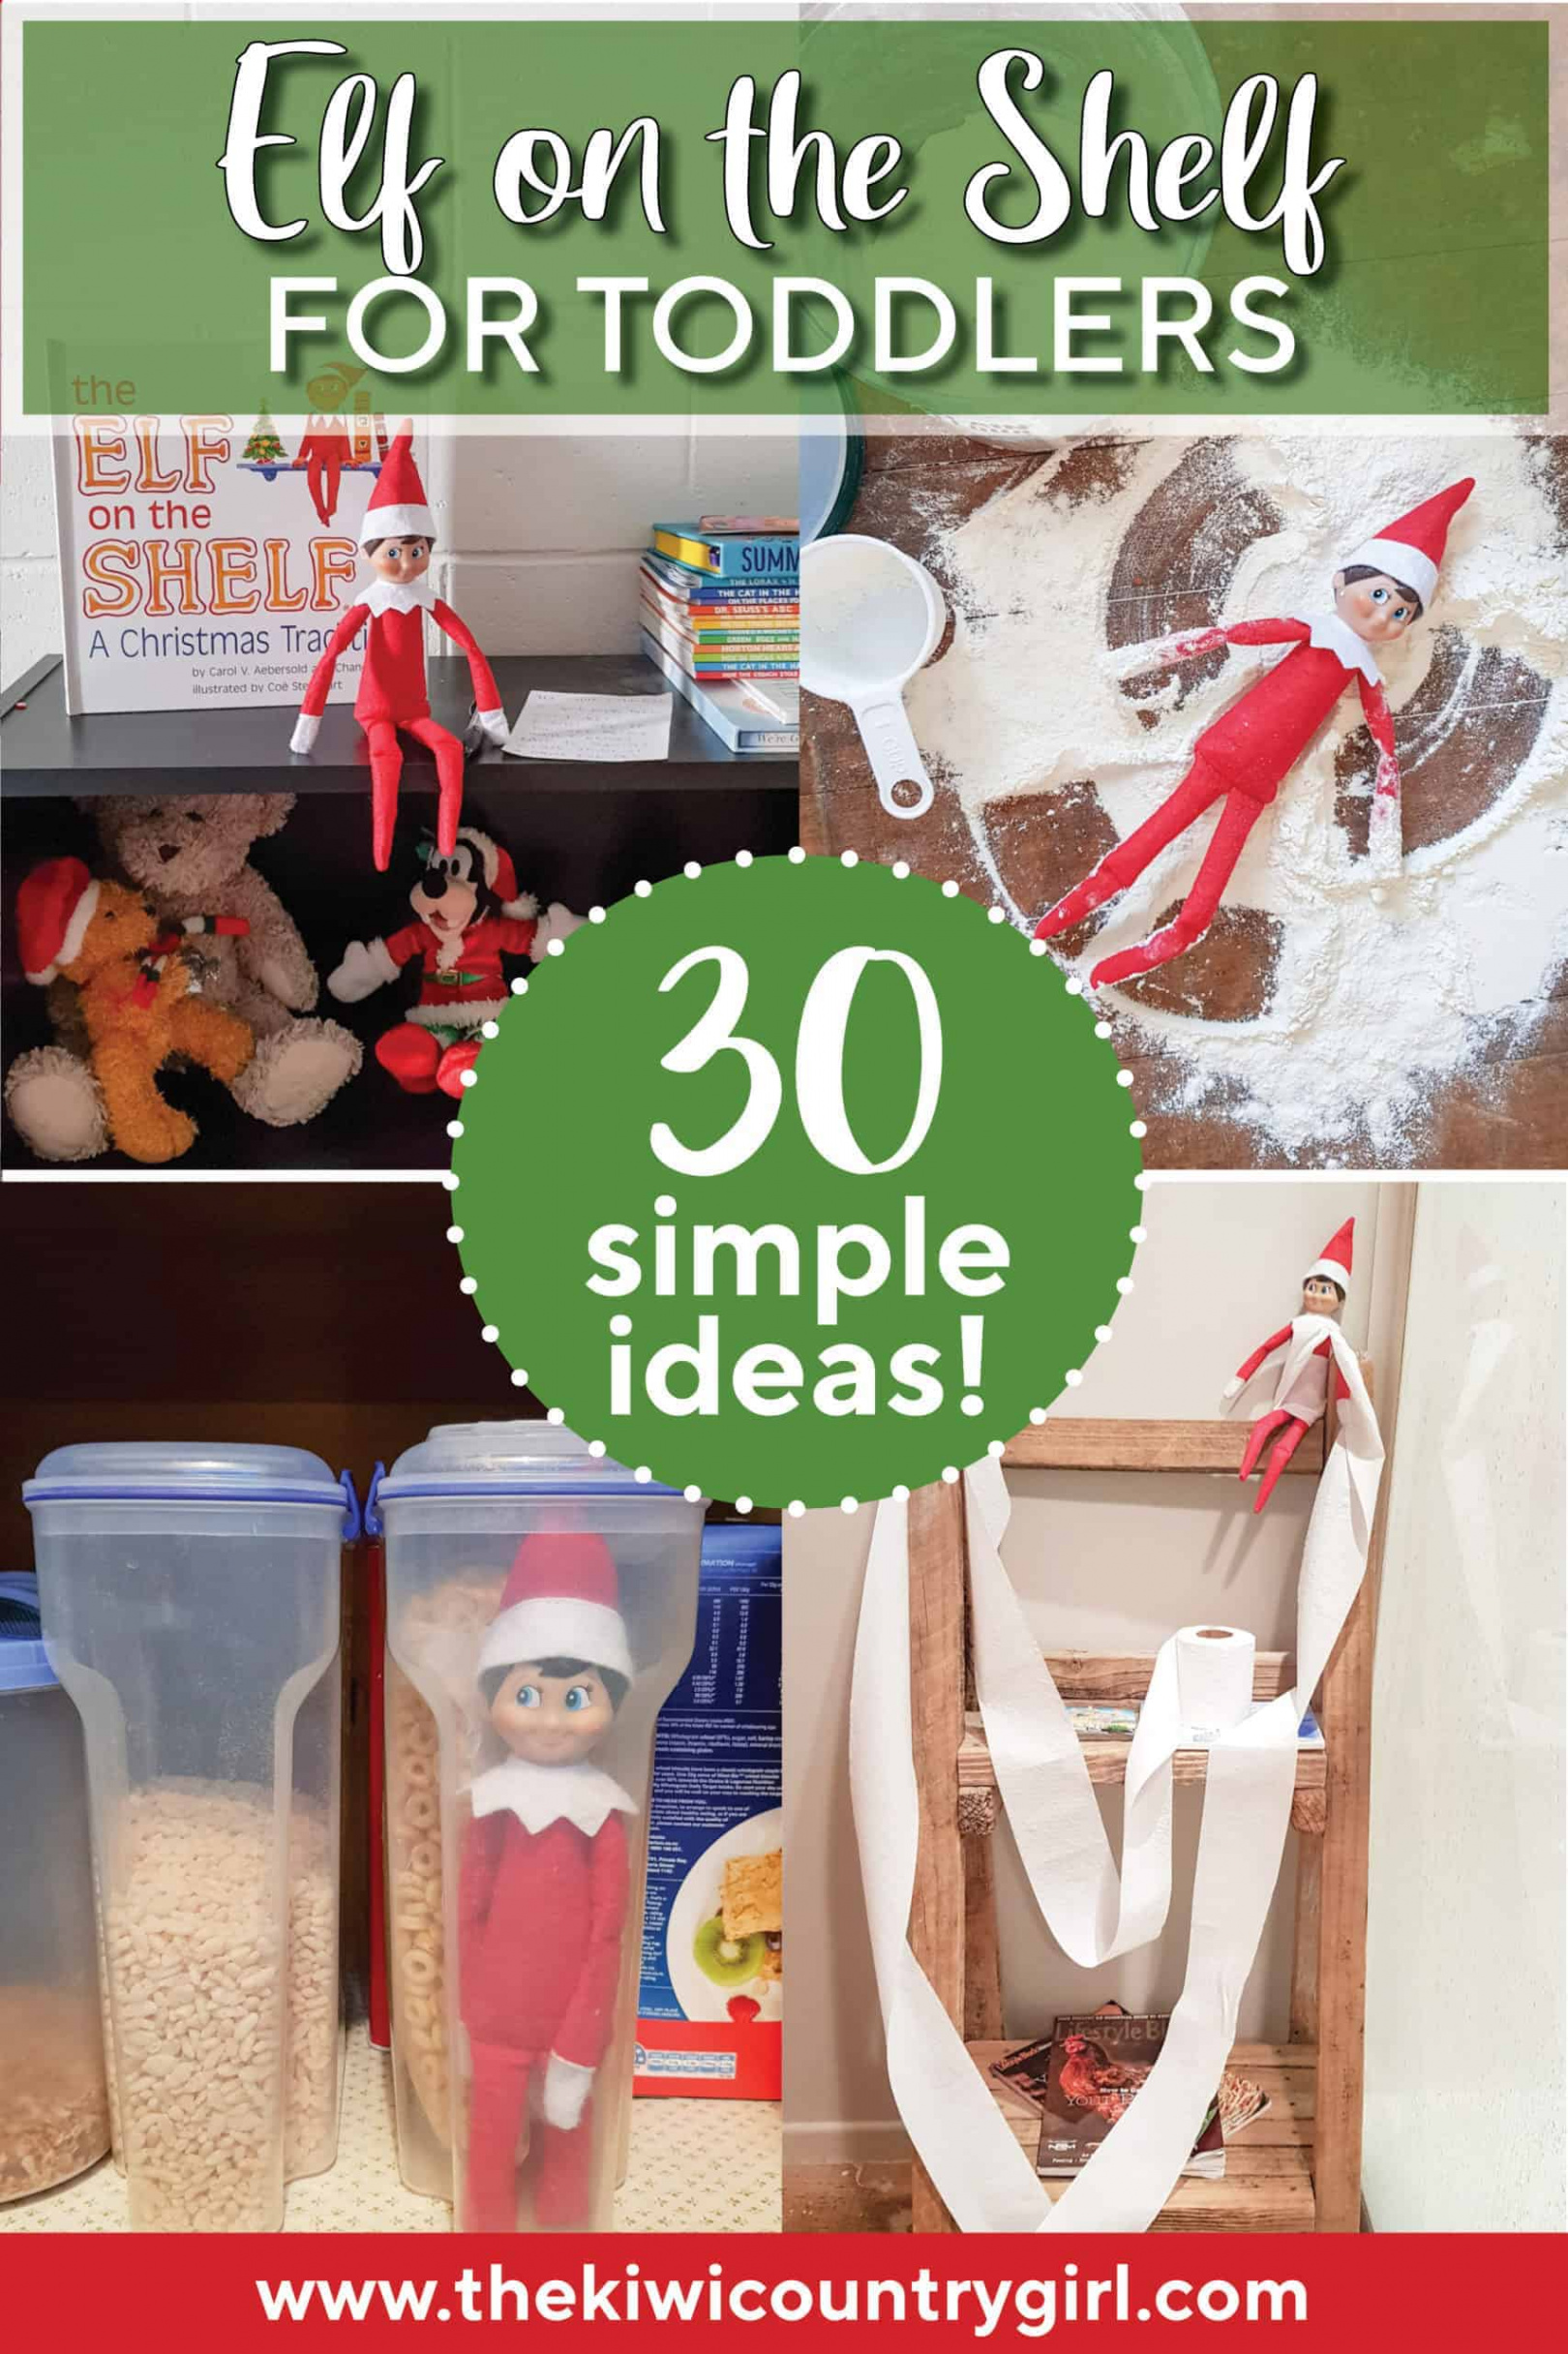 Elf on the Shelf ideas for toddlers - The Kiwi Country Girl